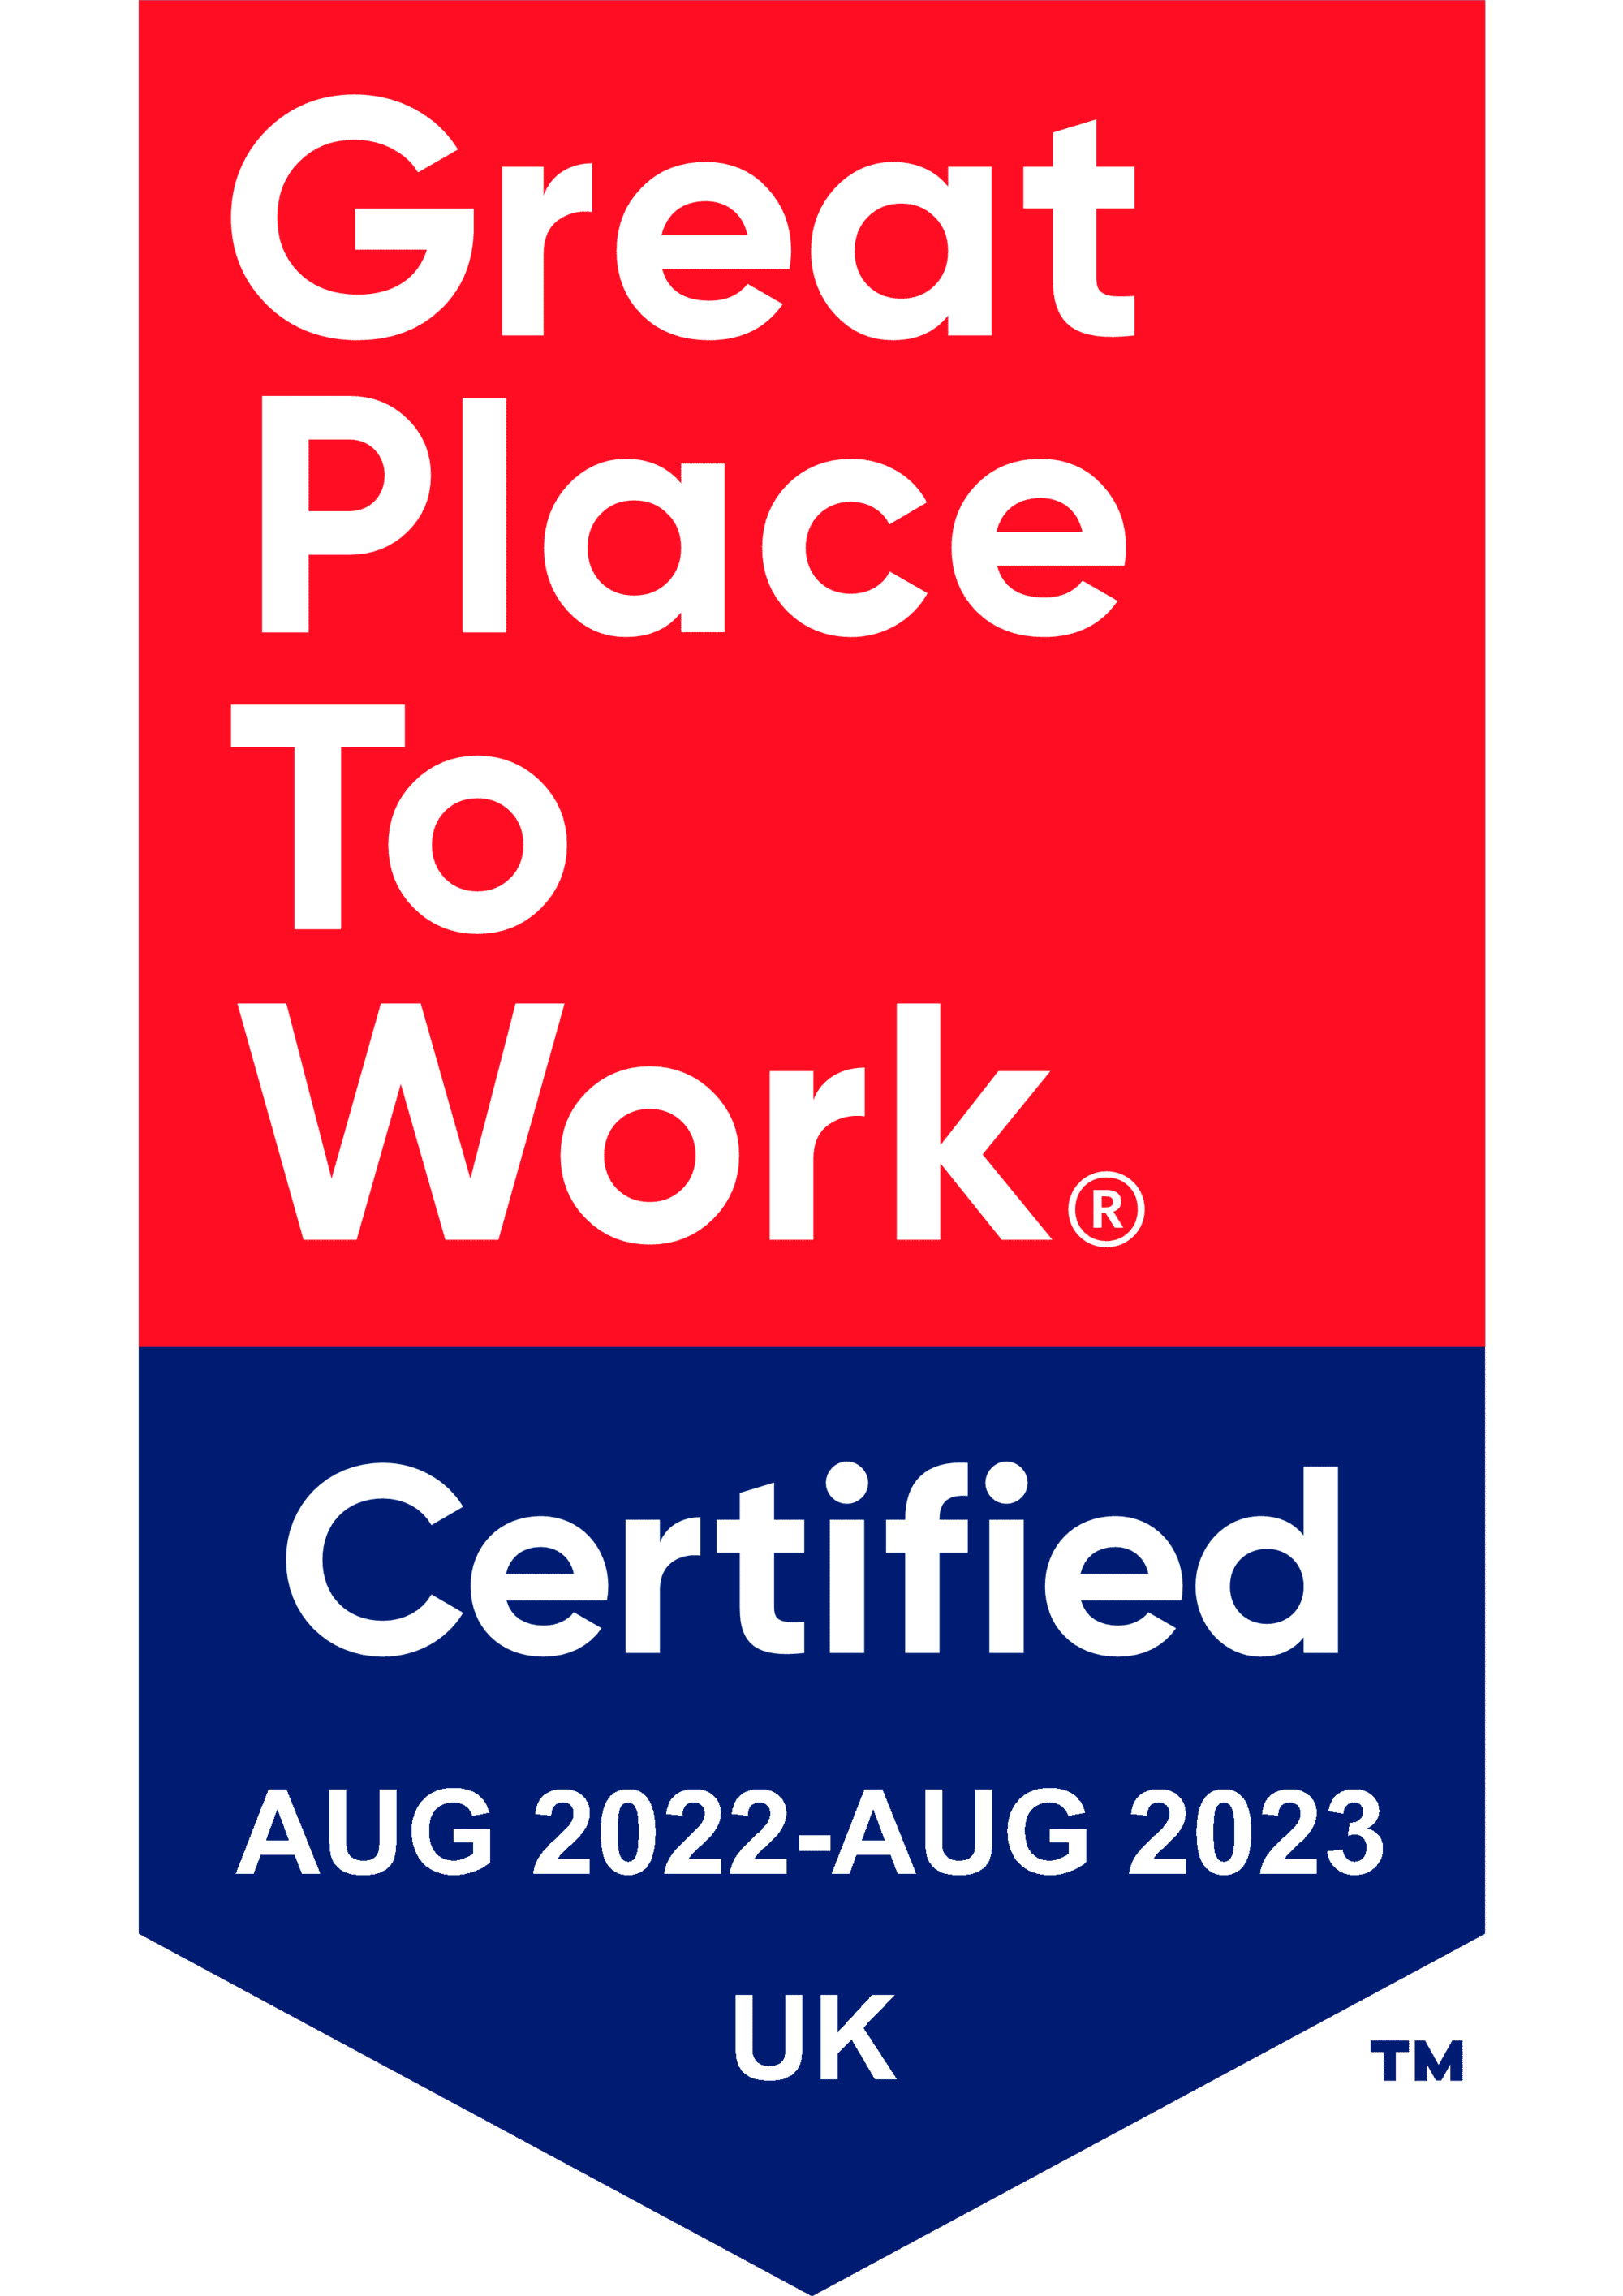 Great Place To Work &#8211; Certified Aug 2022-Aug 2023 UK